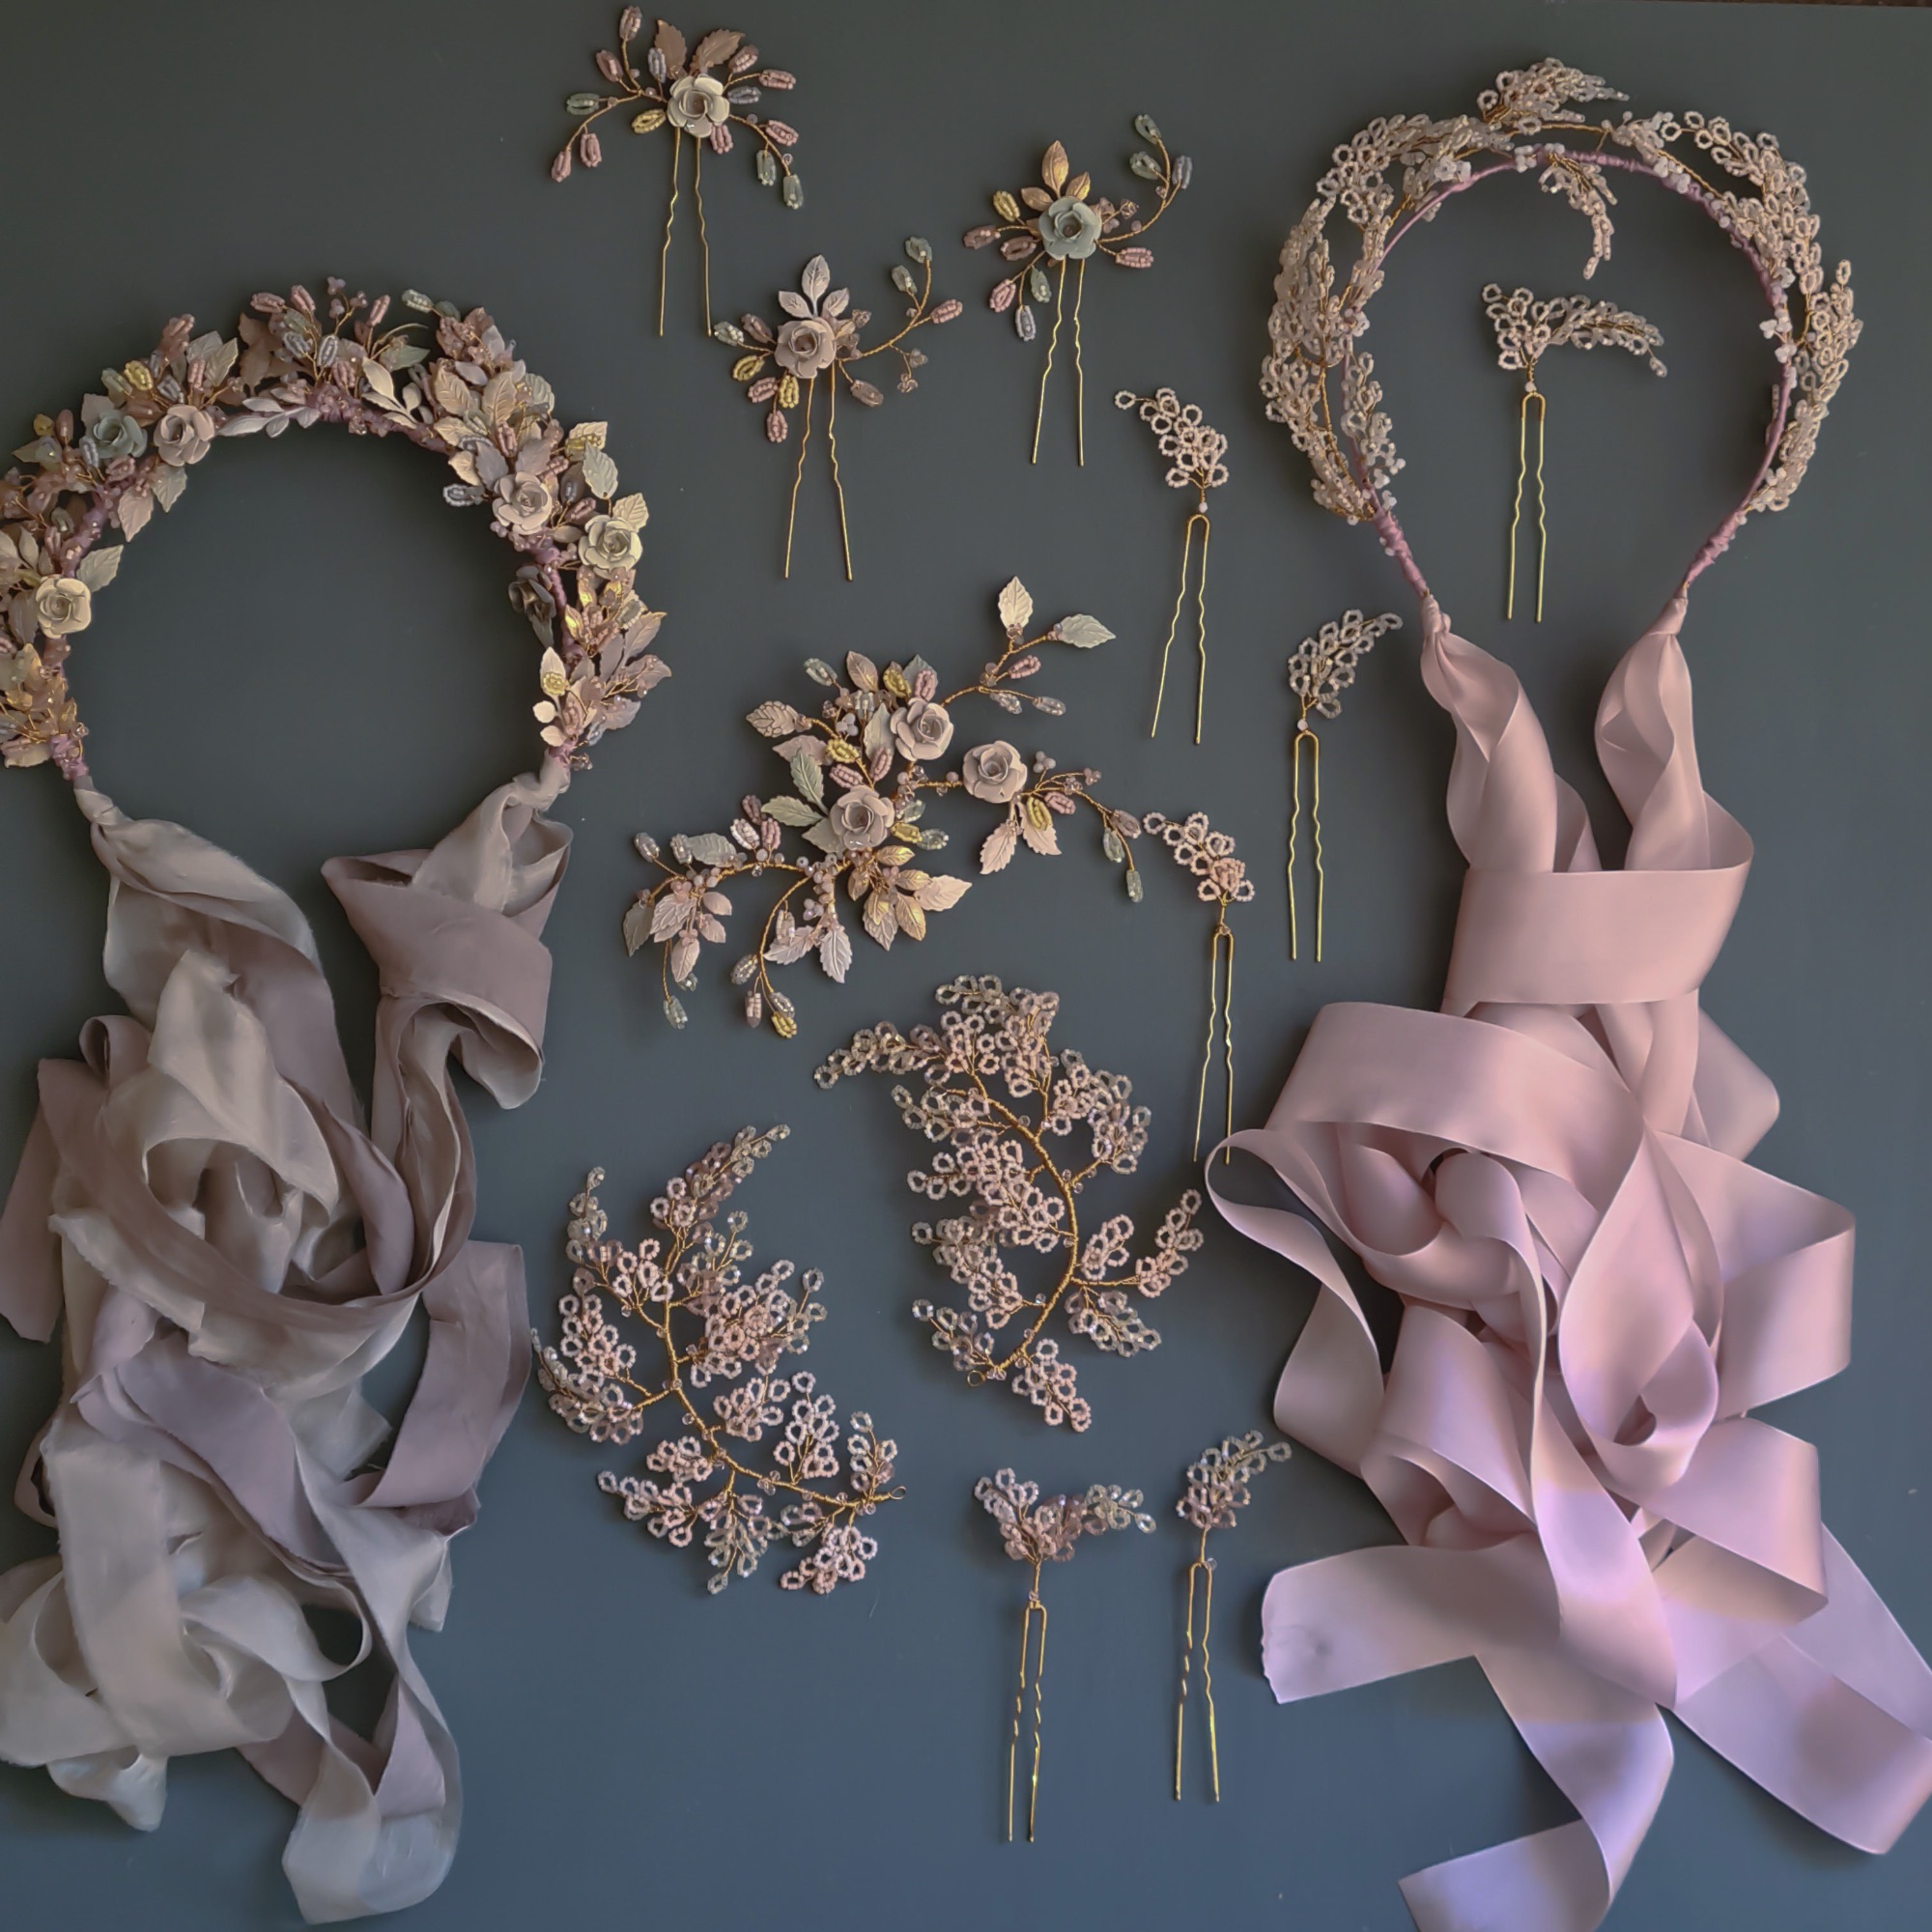 A selection of delicate floral handmade wedding headdresses, headpieces and hair pins.  Made by Clare Lloyd